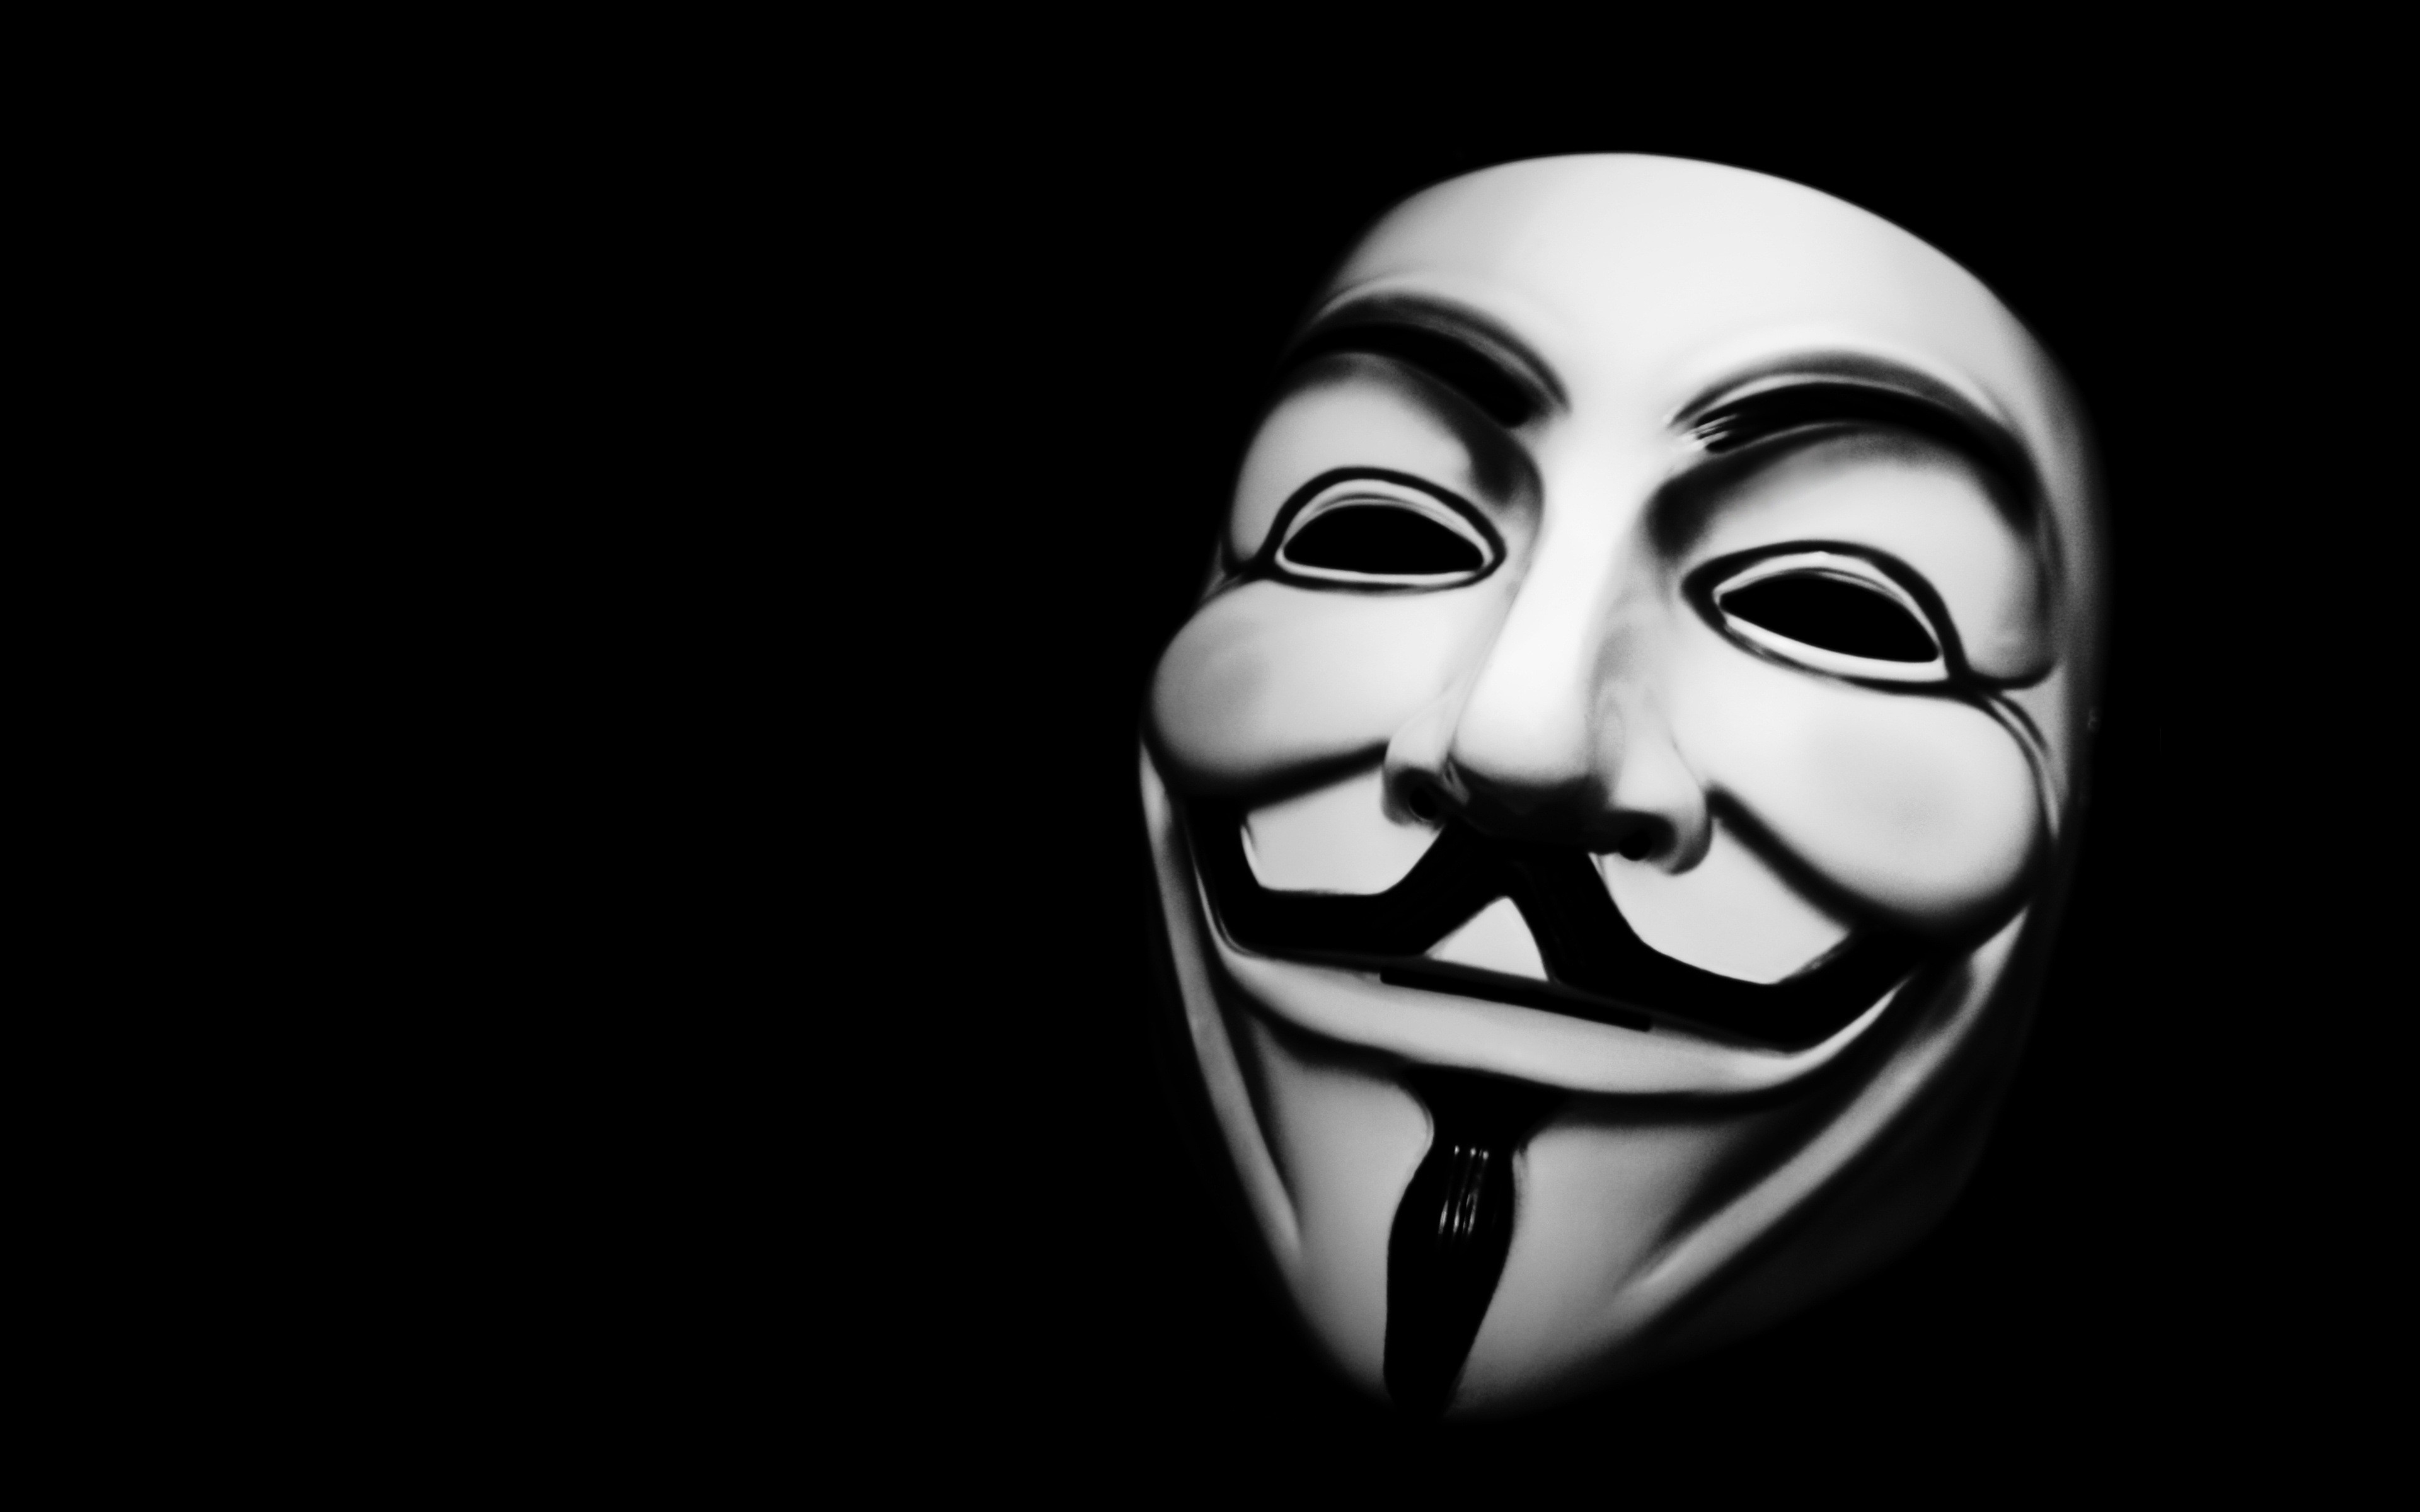 Anonymous V for Vendetta Mask Wallpapers HD / Desktop and Mobile